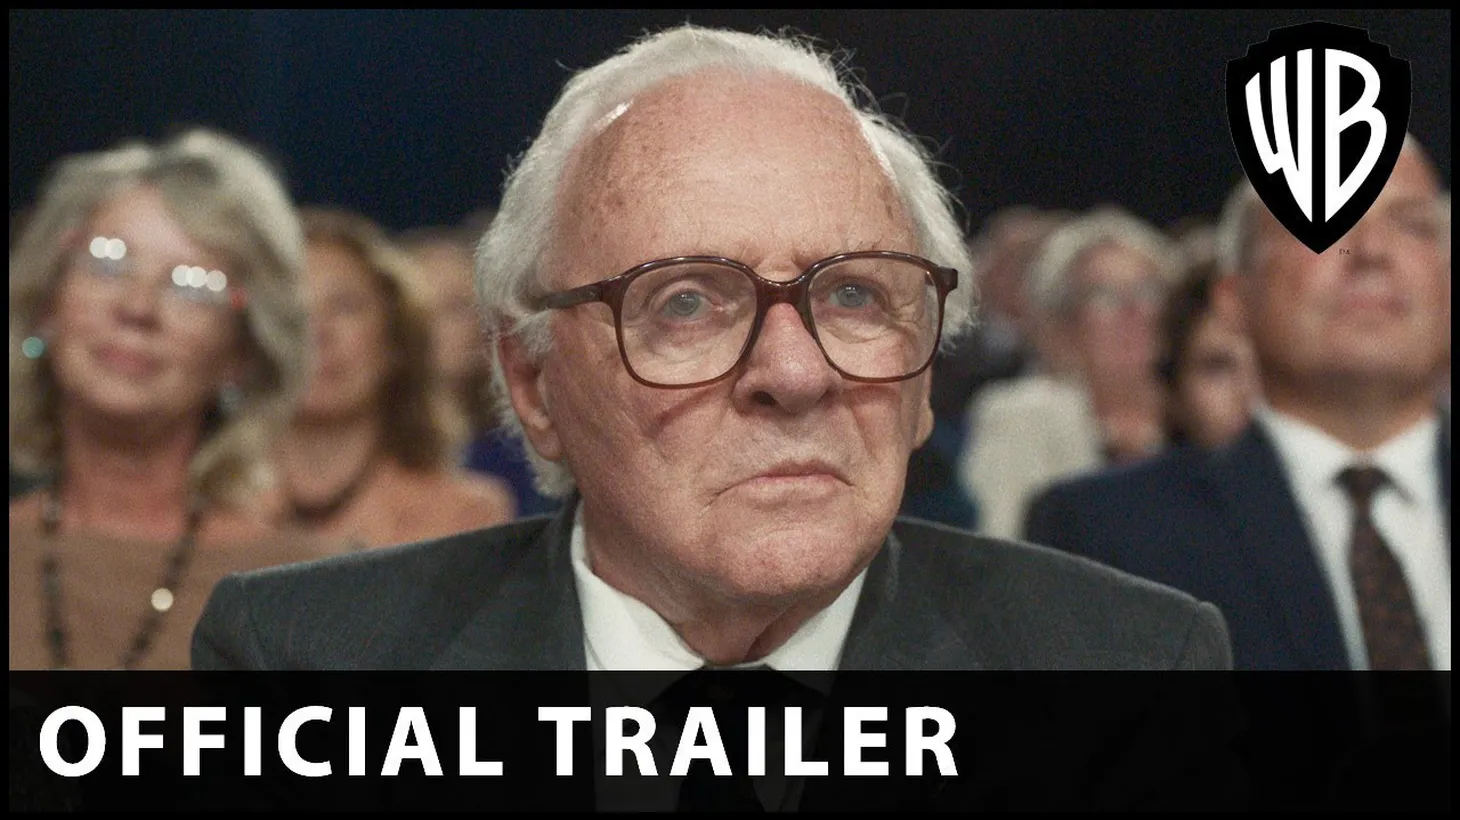 “One Life” is about a stockbroker who saved hundreds of Jewish kids during the Holocaust.